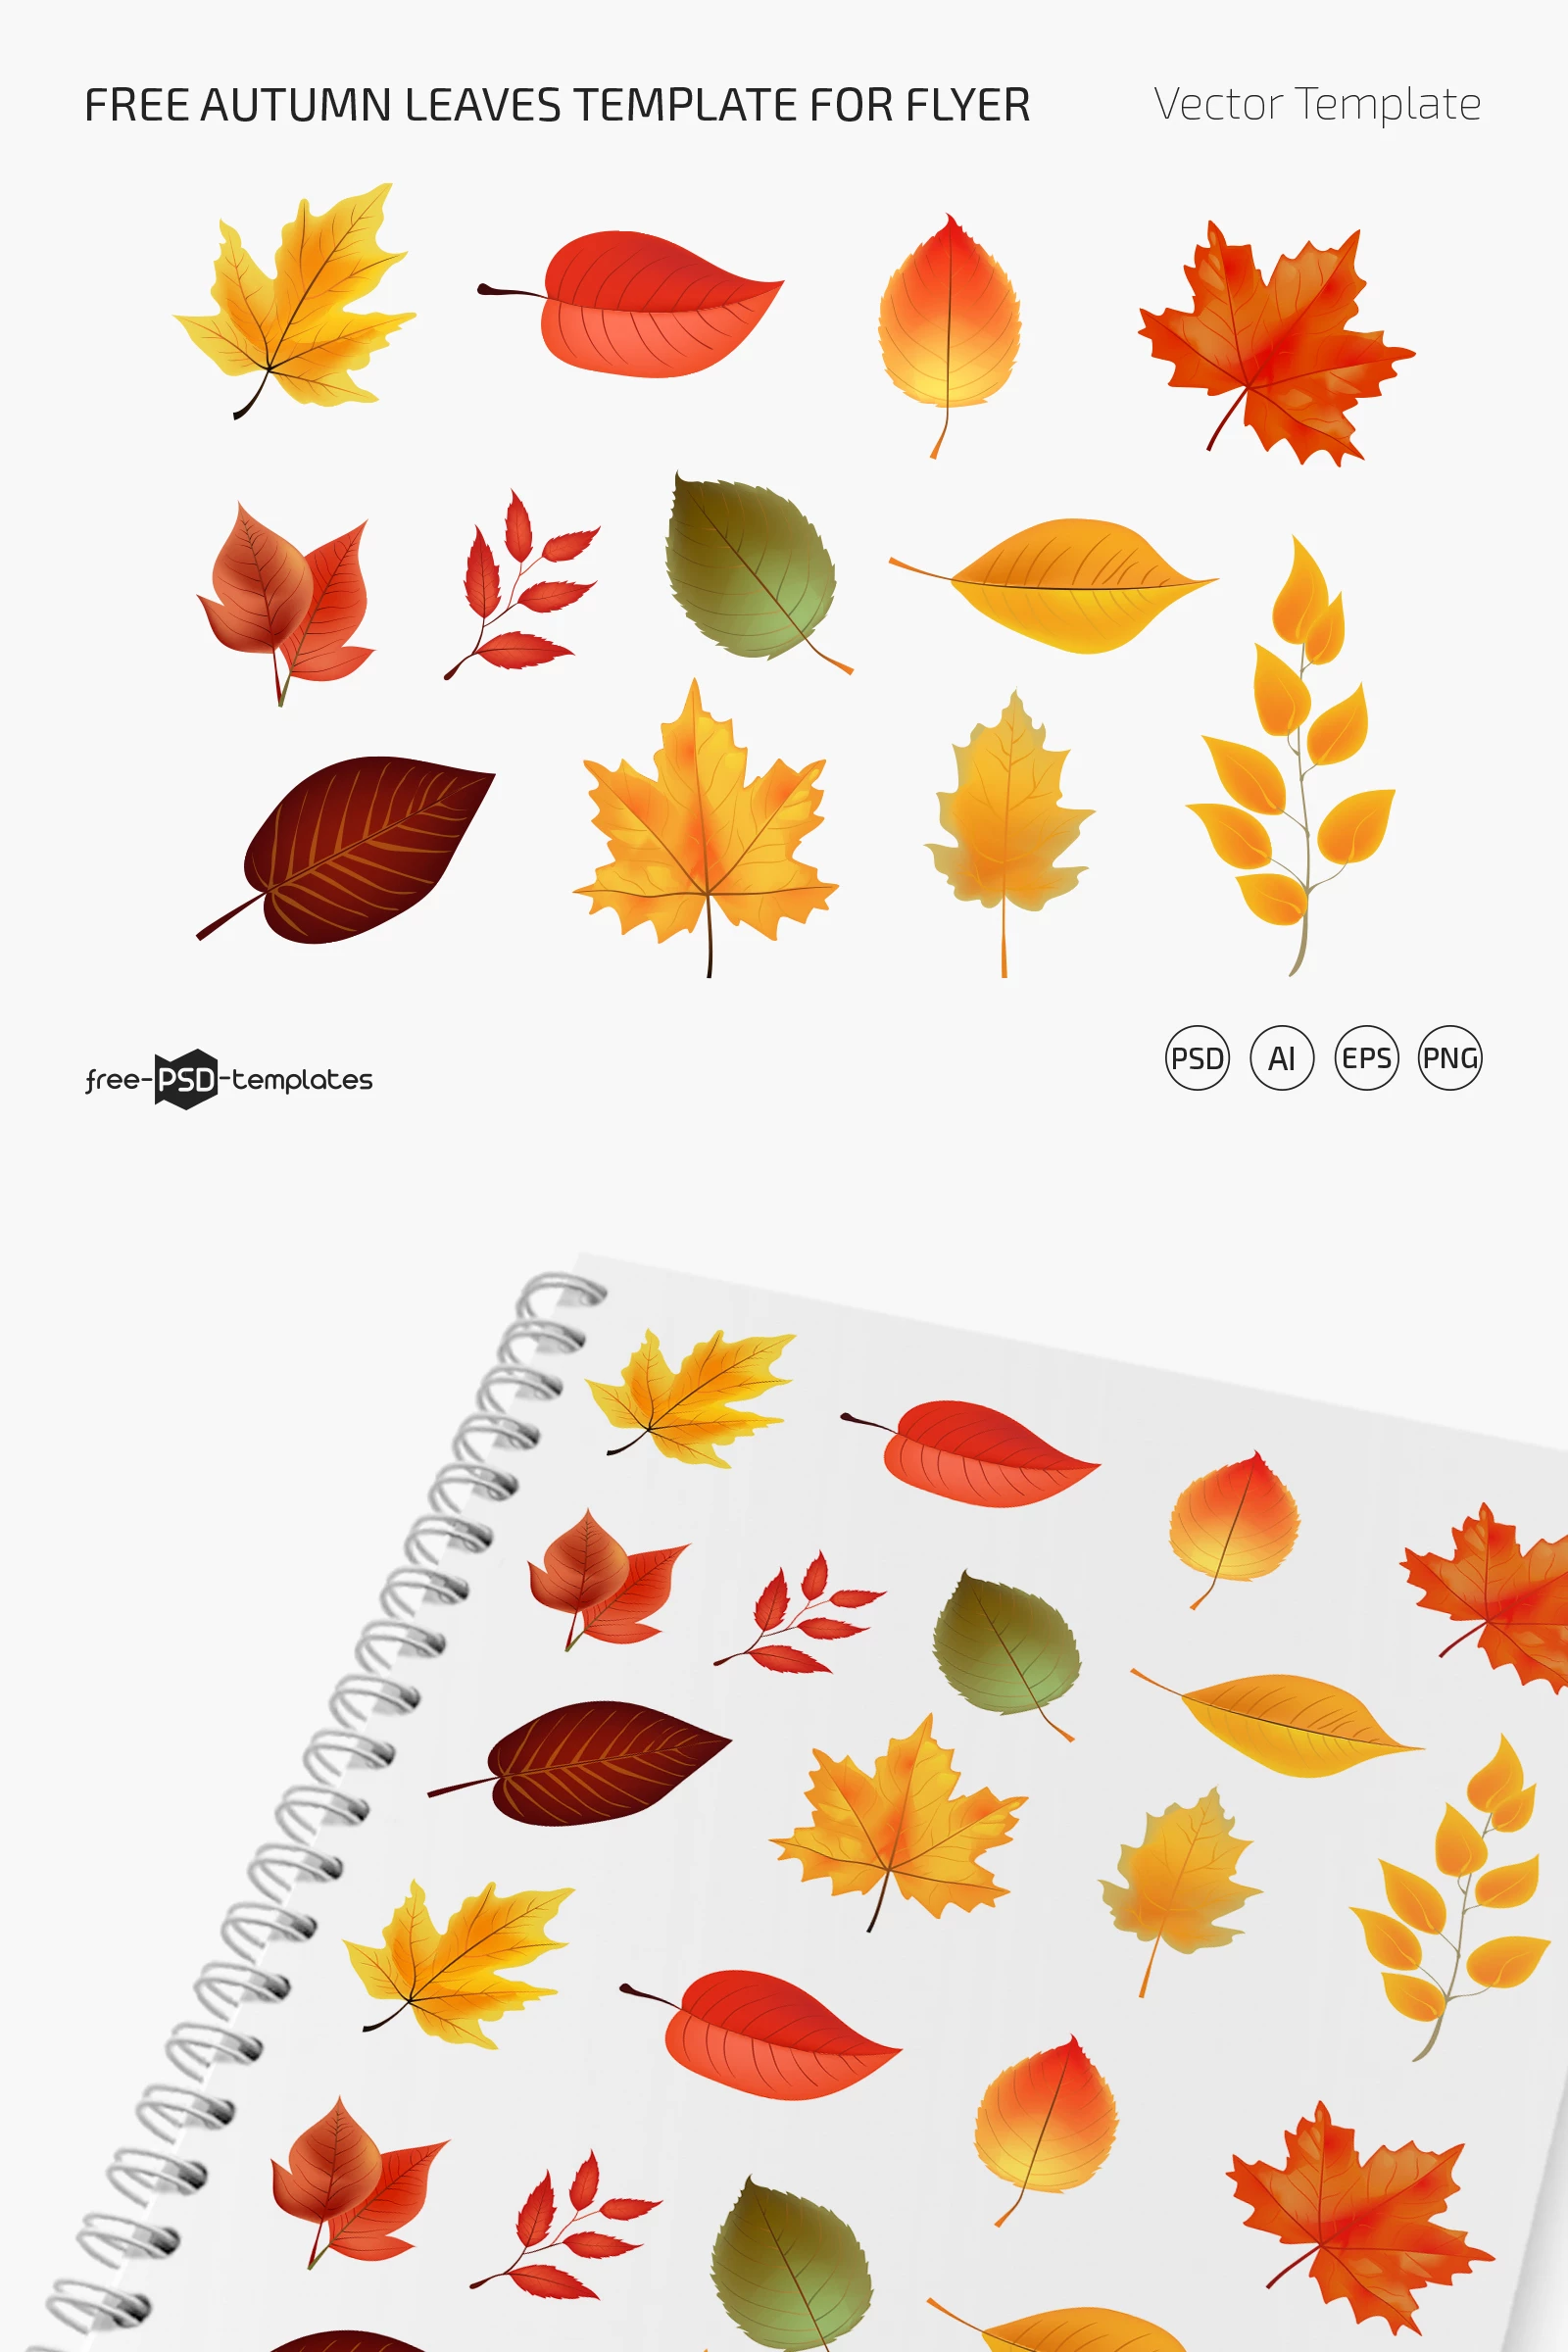 Free Autumn Leaves Template for Flyer